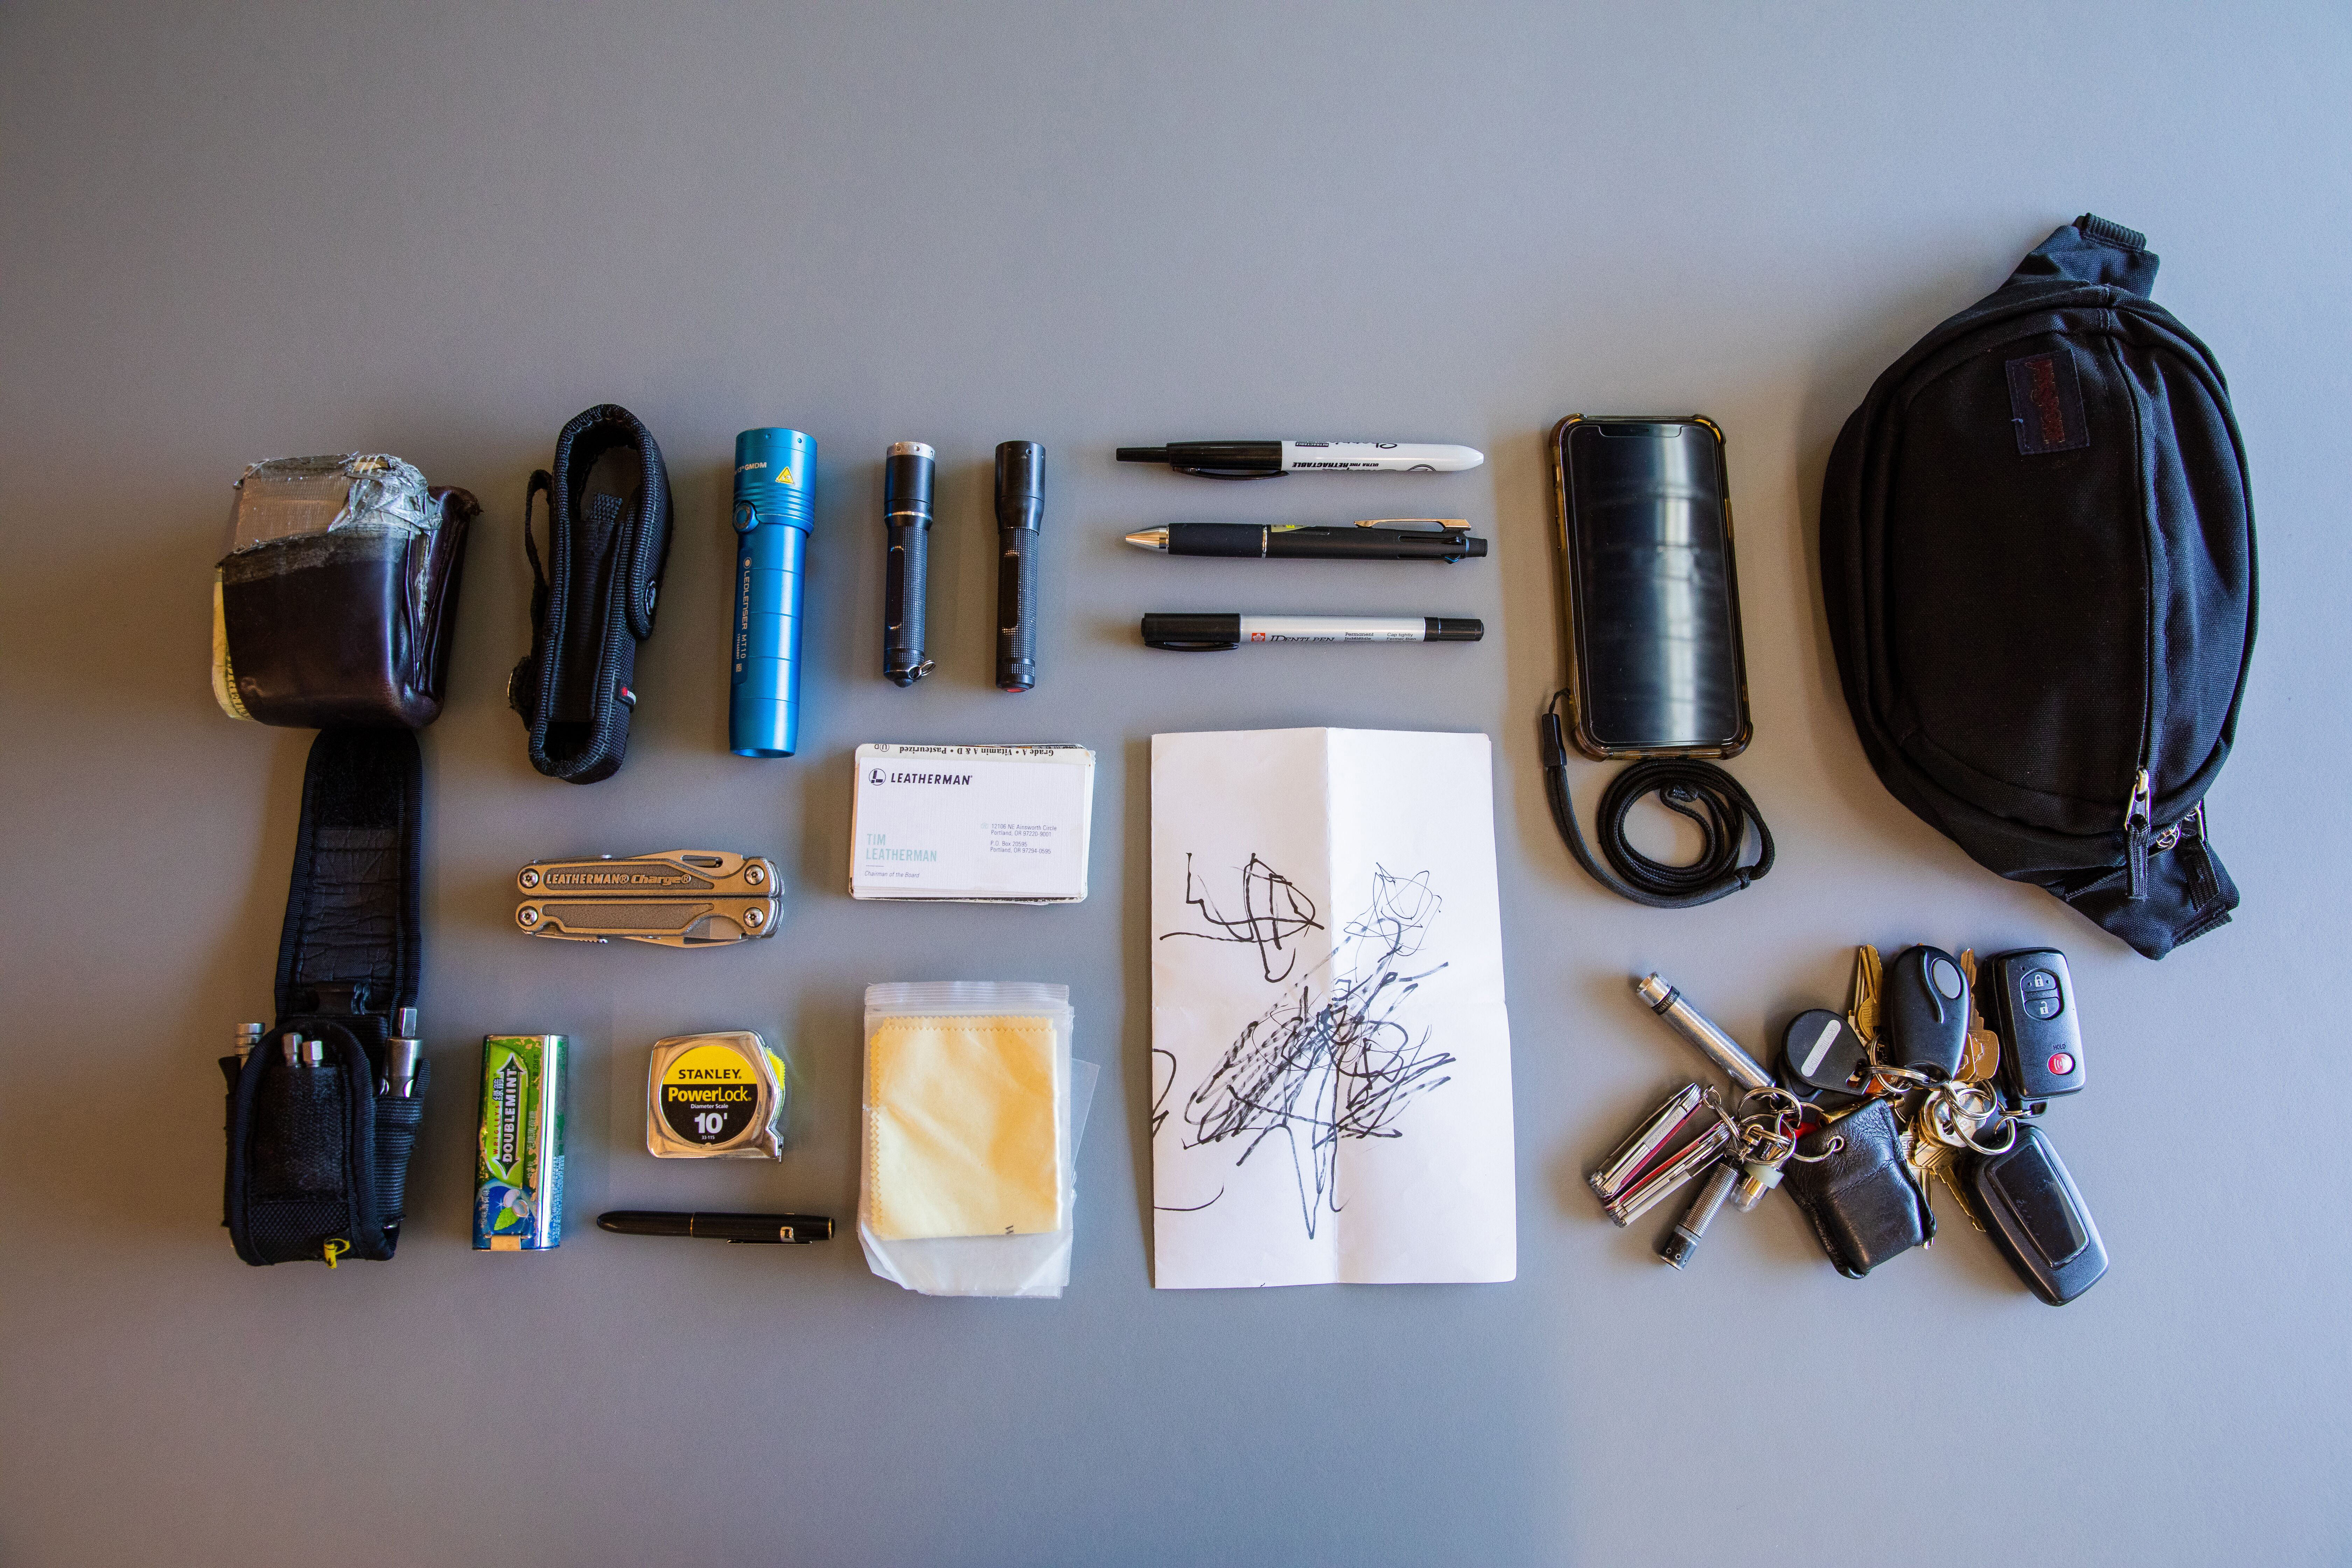 Tim's pocket contents with an assortment of pens, paper, lights and his personal Charge